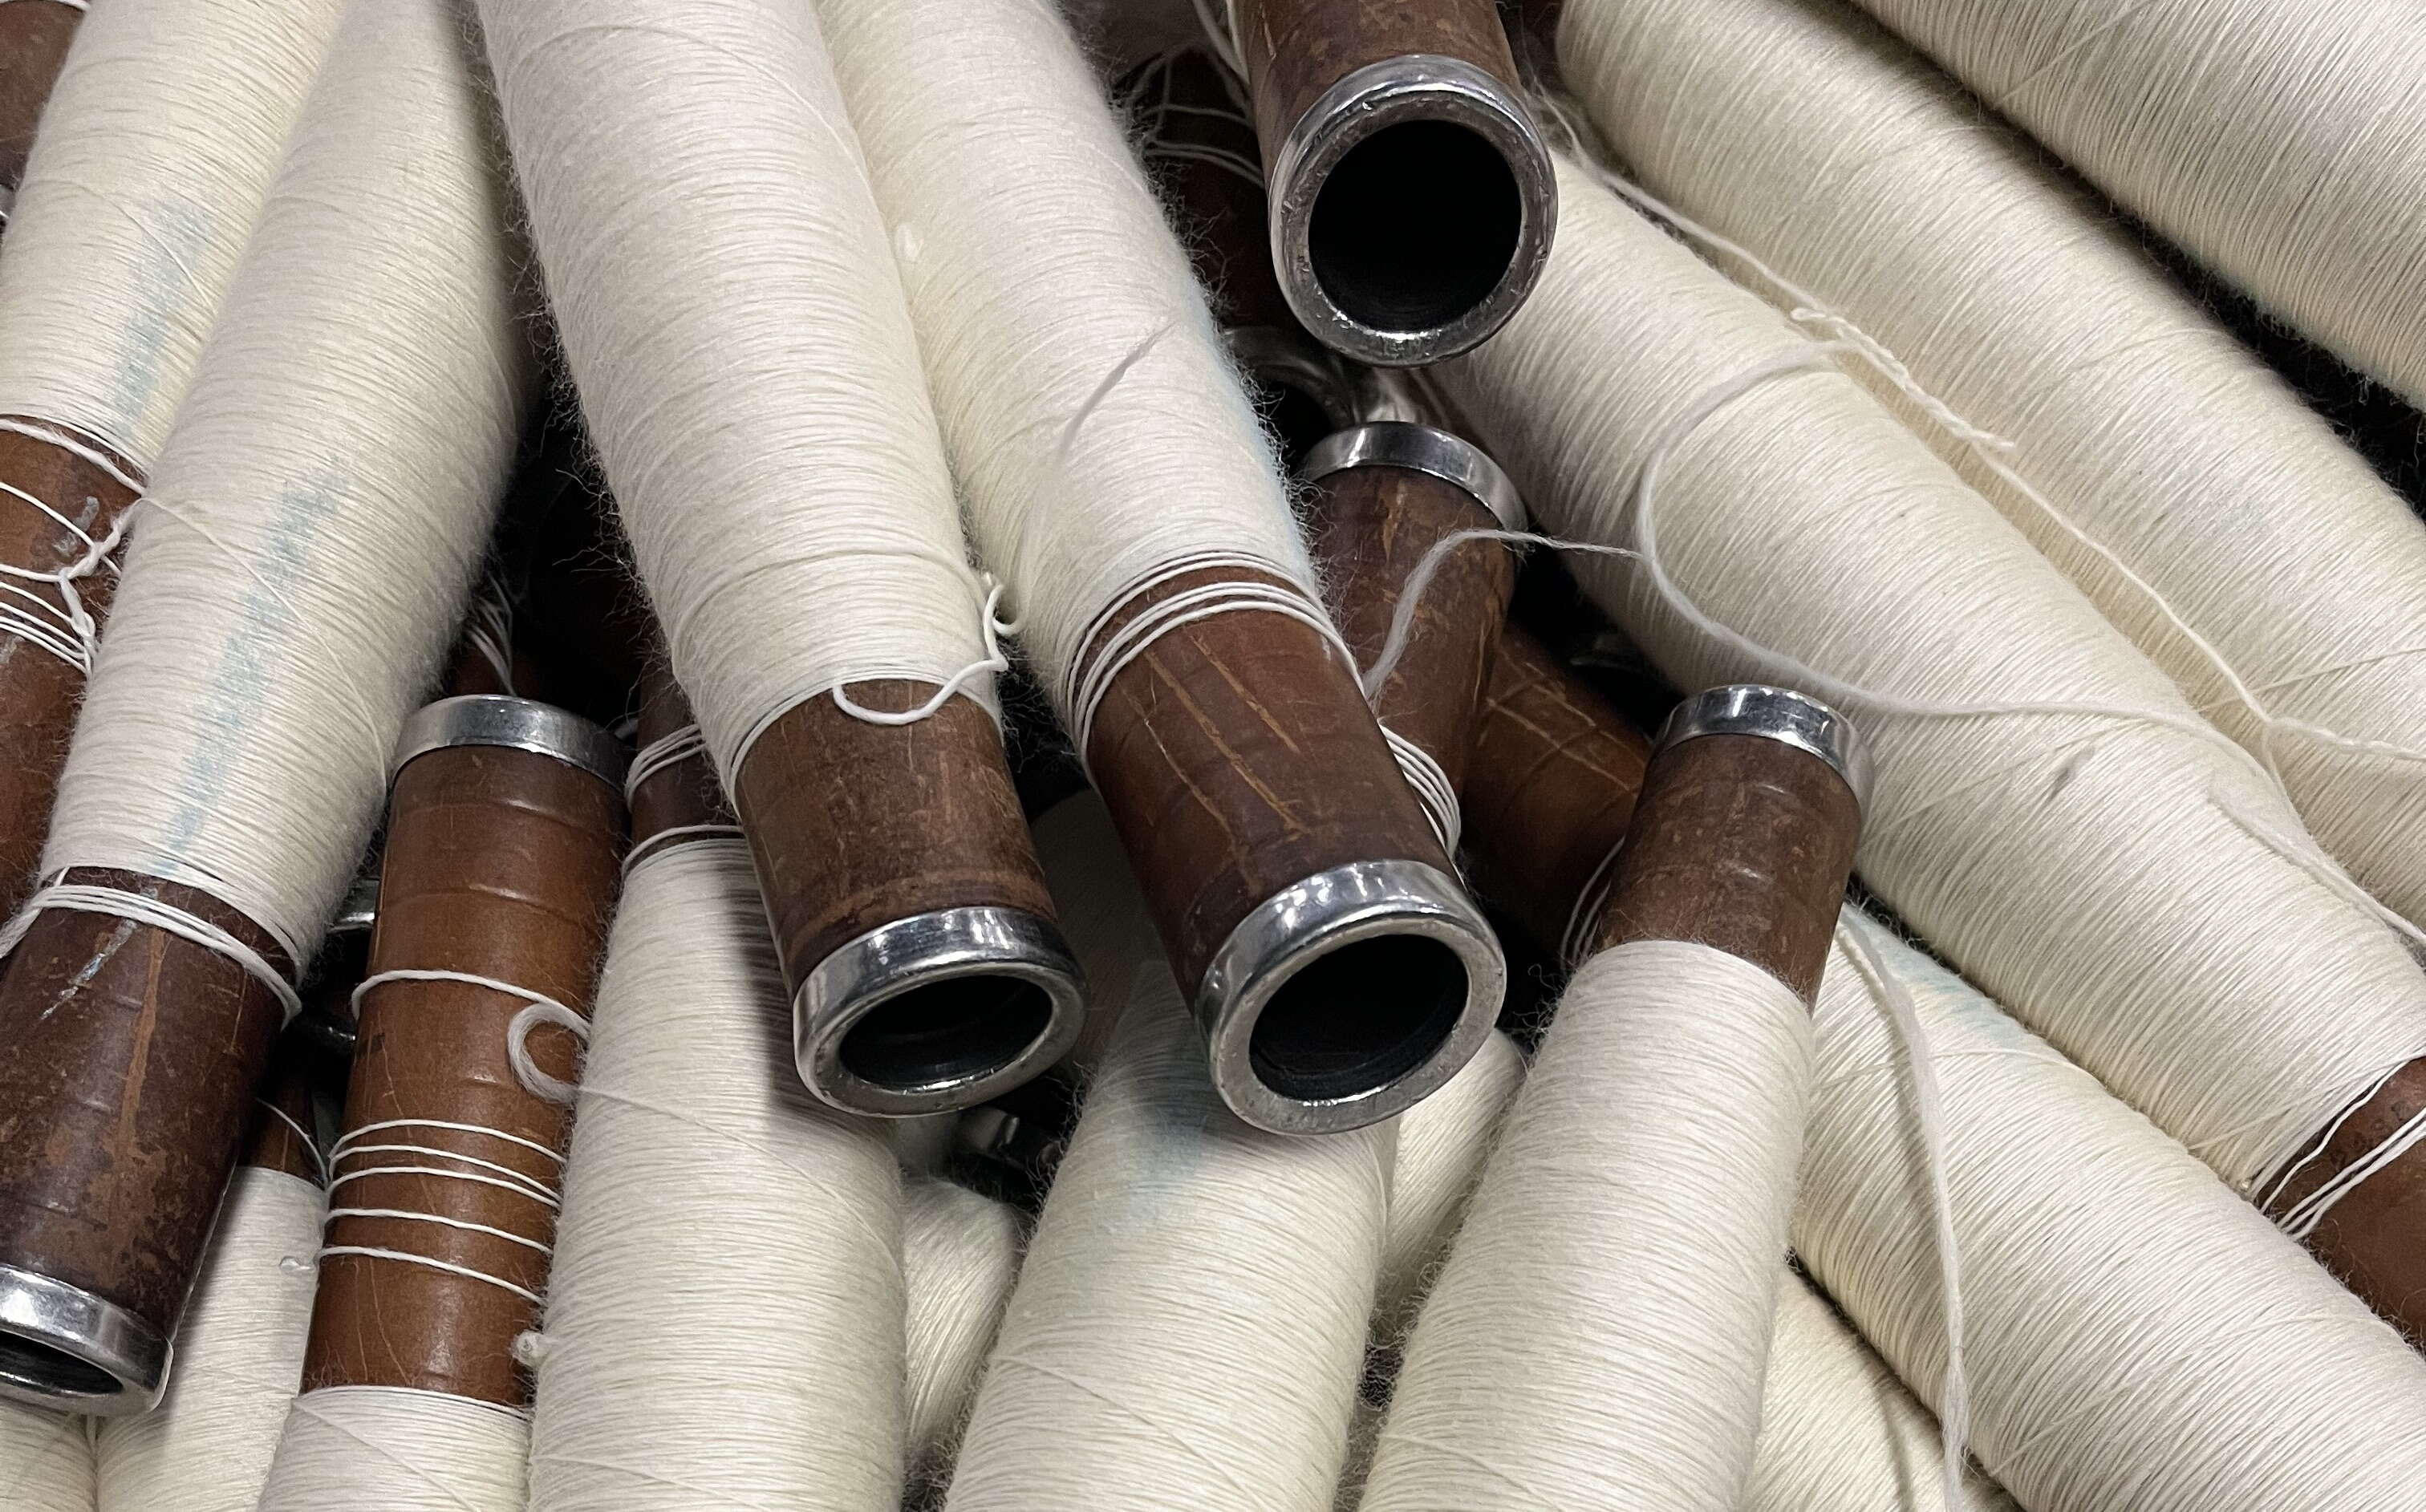 A bin is full of spindles wrapped in white yarn.